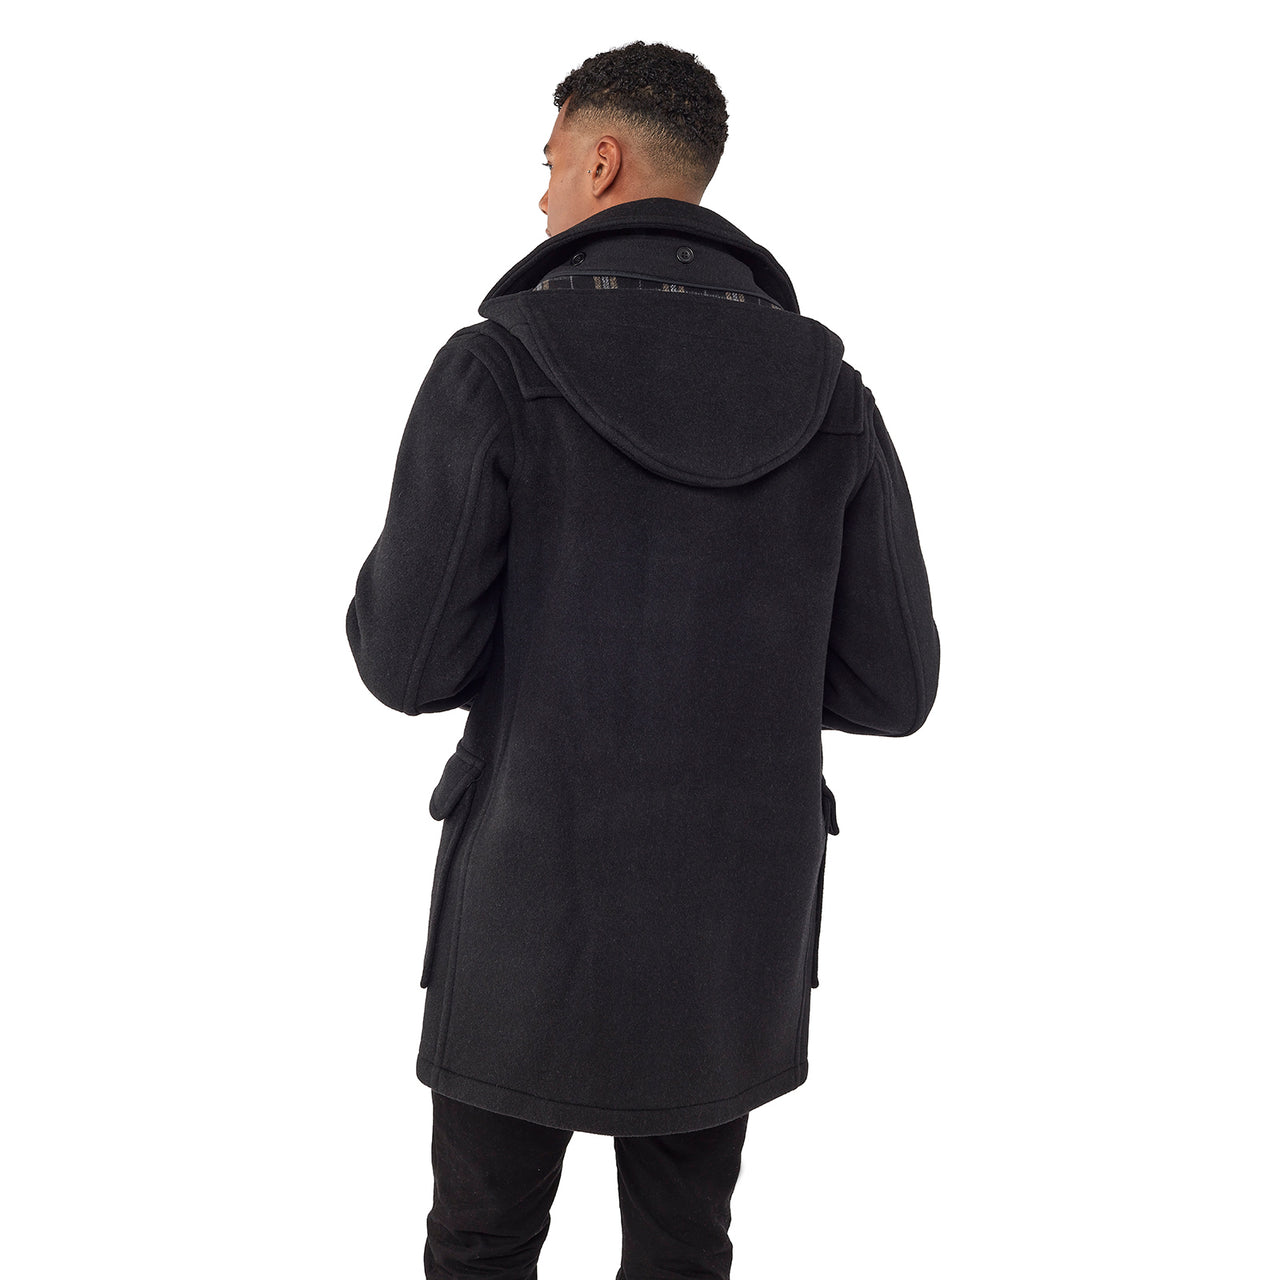 Men's Charcoal London Custom Fit Convertible Duffle Coat, With Original Removable Hood And Horn Toggles